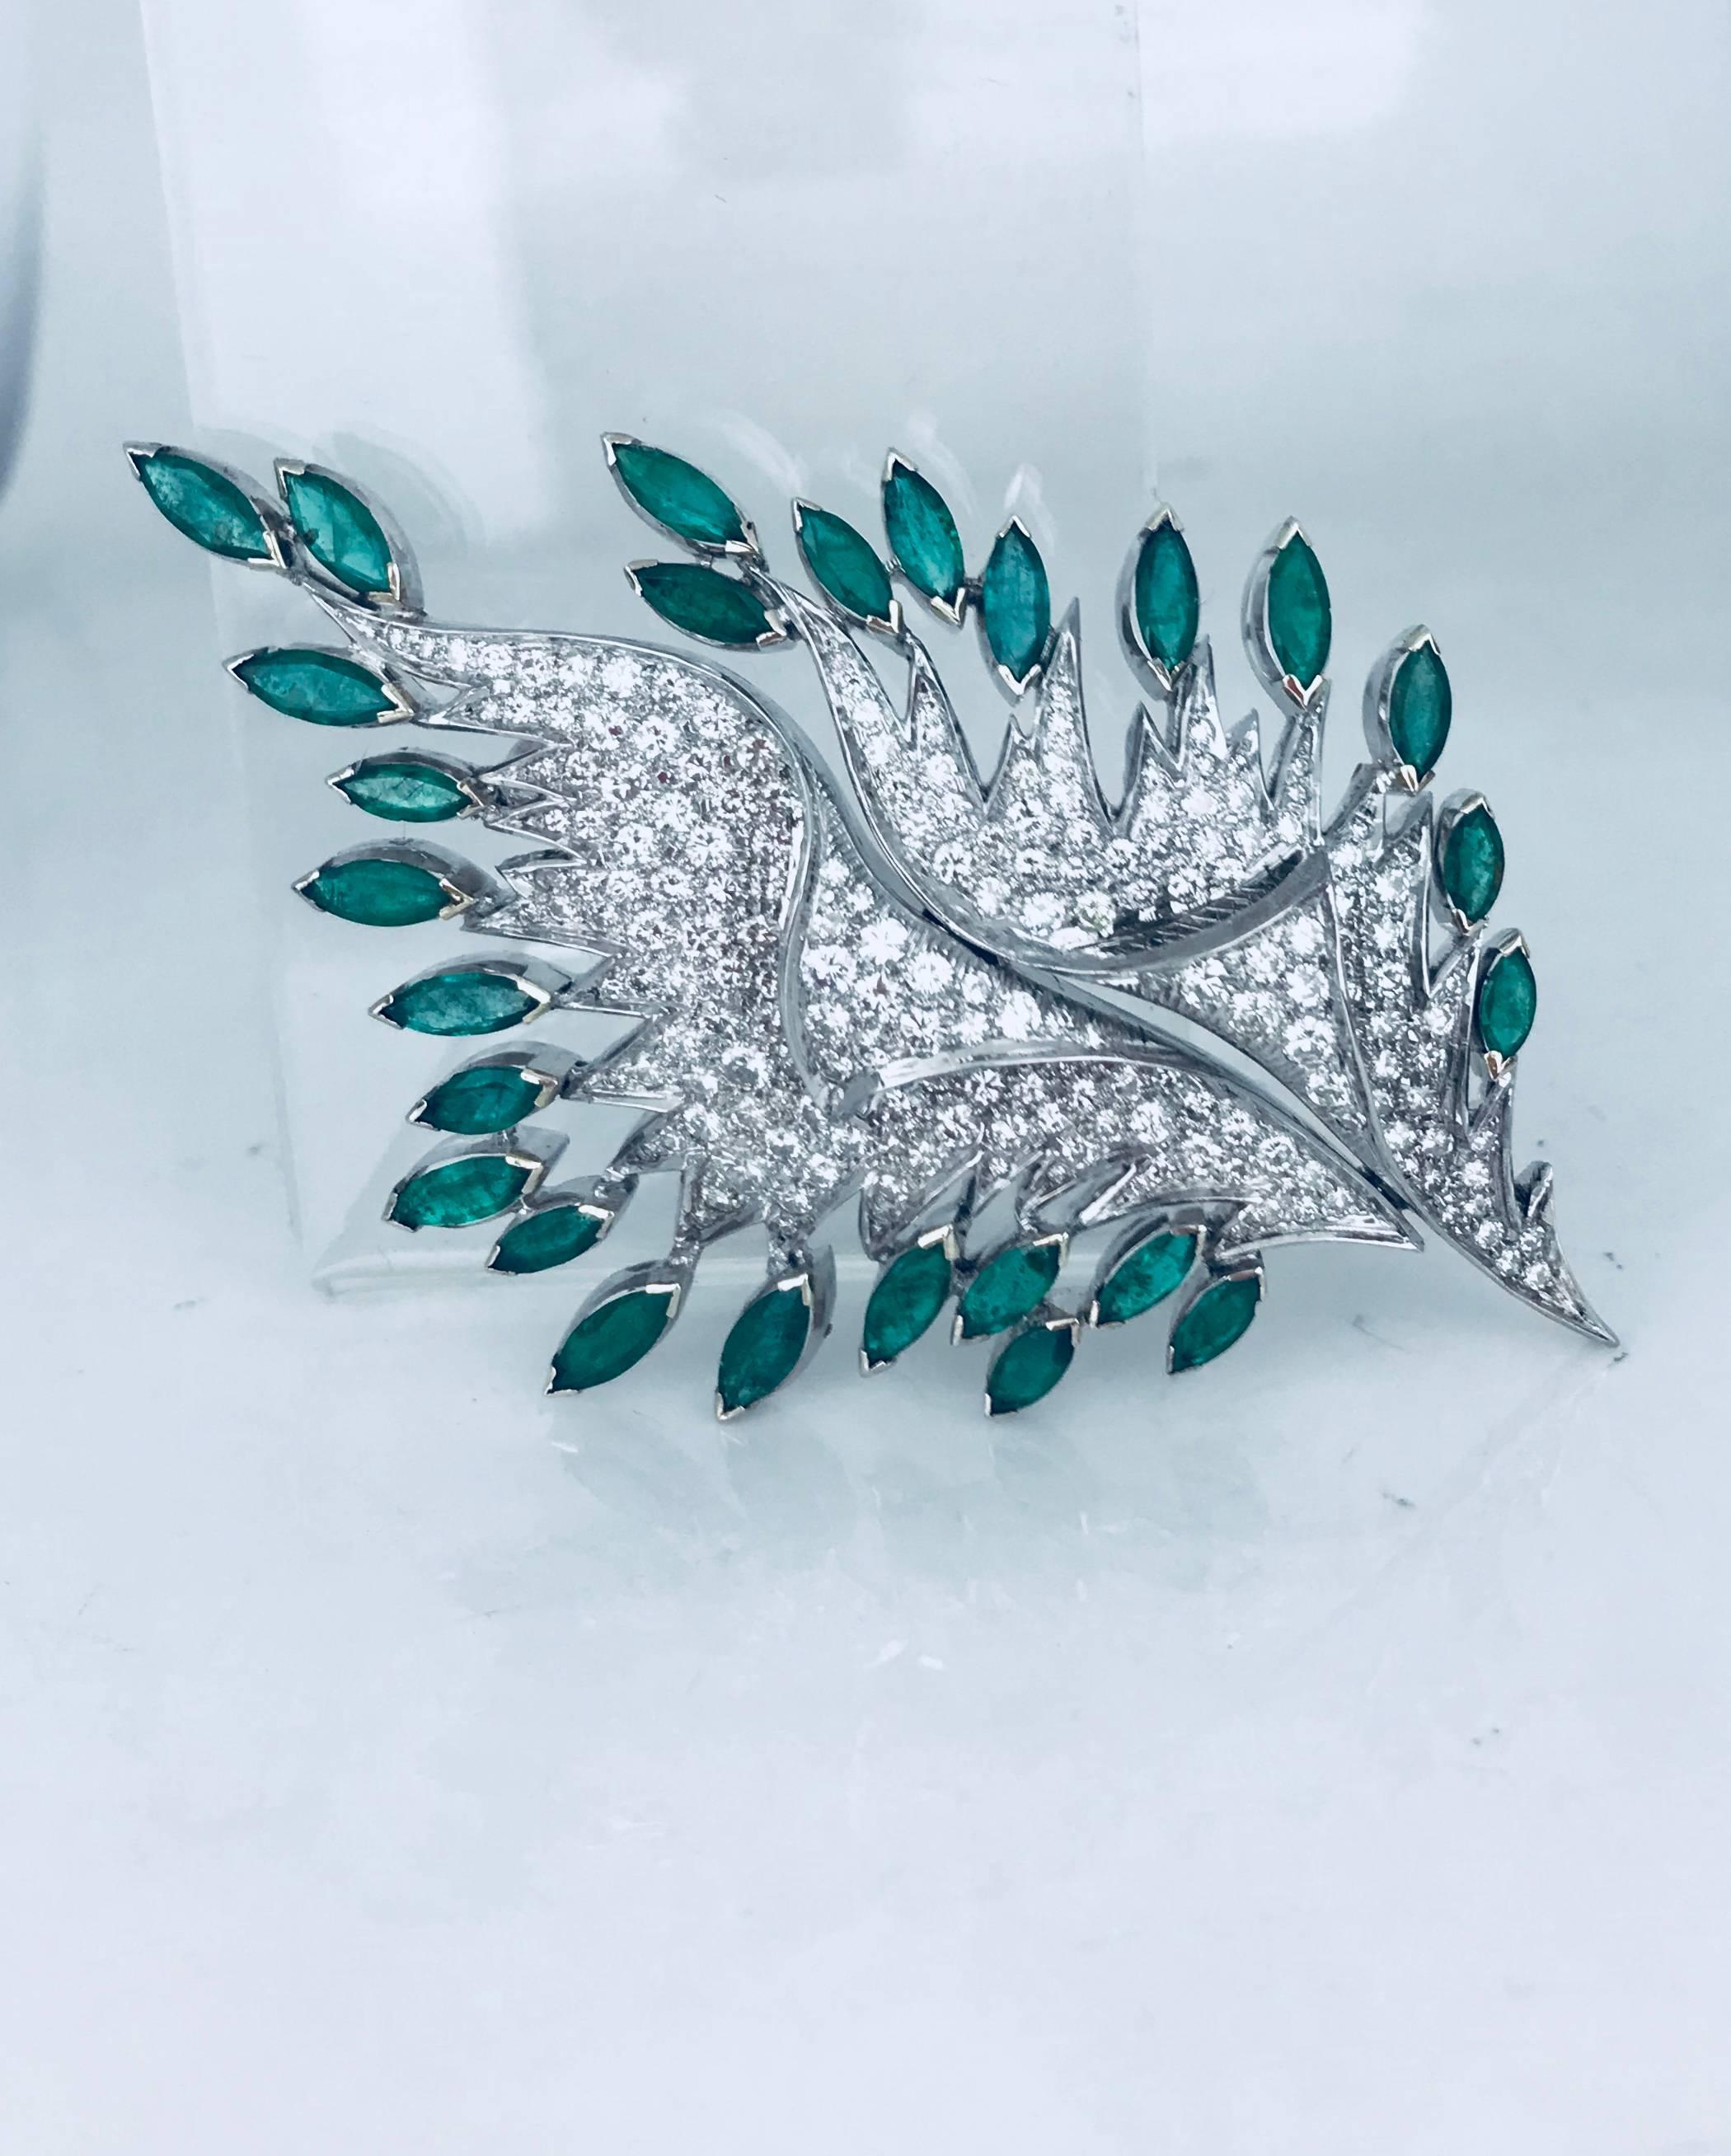 Platinum diamond and emerald retro-leaf, designed pin measuring 4 x 3 inches in diameter. The brooch consists of approximately 200 diamonds averaging .01-.10 points each (1.80-3.2 mm with an average of .05-.04 points each). The total diamond weight